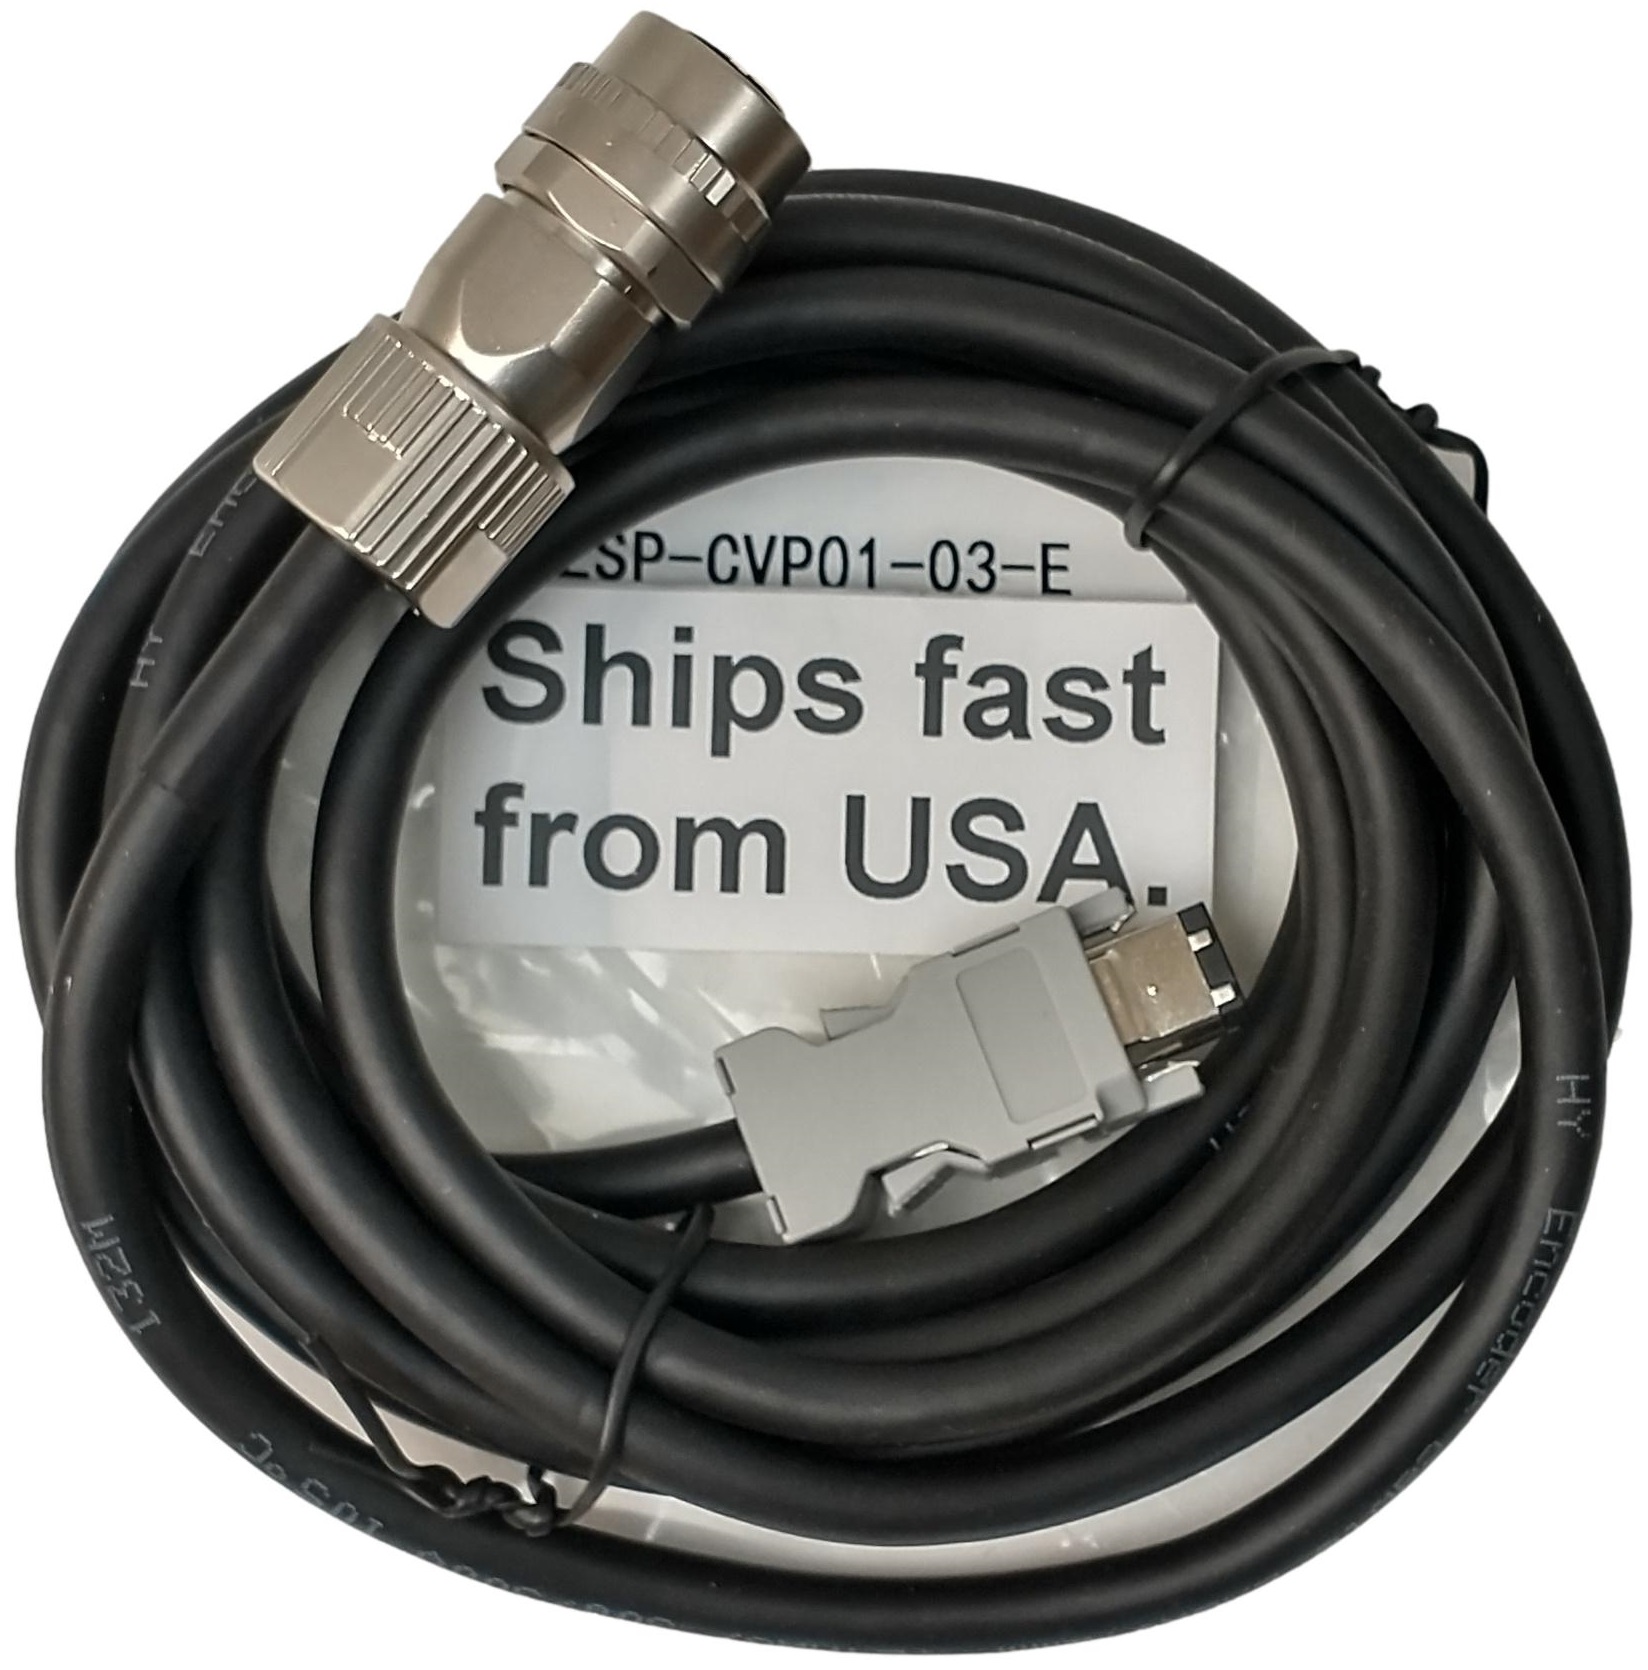 JZSP-CVP01-03-E-SUB, Fast Ship from USA. 1 Business Day Ship-Out